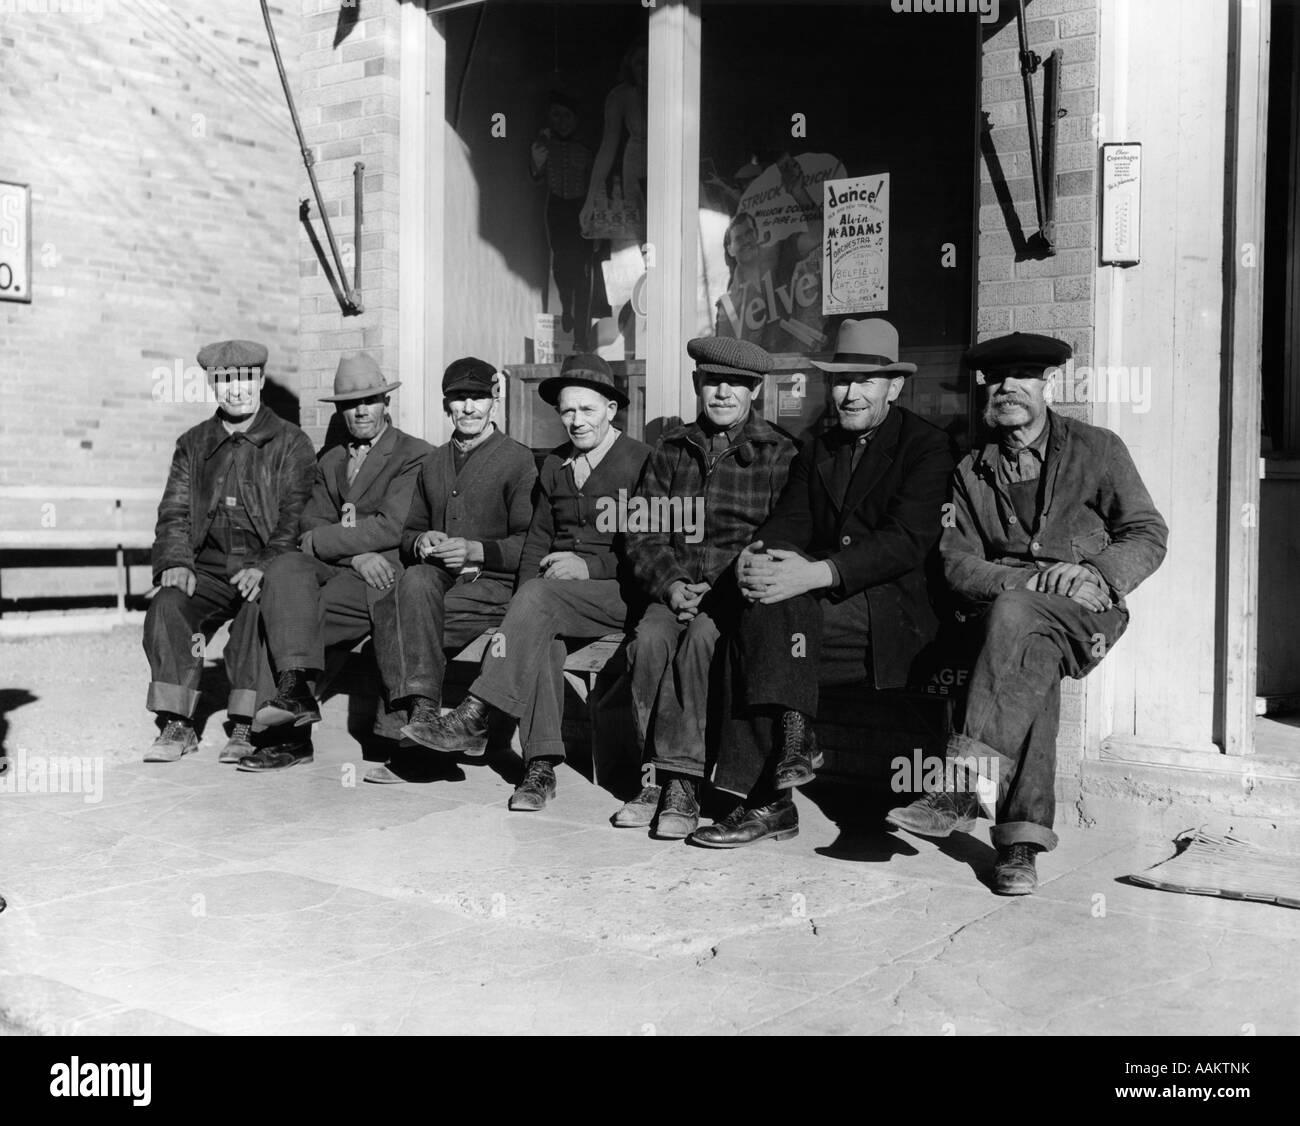 1920s 1930s GROUP OF OLD MEN IN HATS & DUNGAREES SITTING ON BENCH IN FRONT OF STORE WINDOW LOOKING AT CAMERA Stock Photo